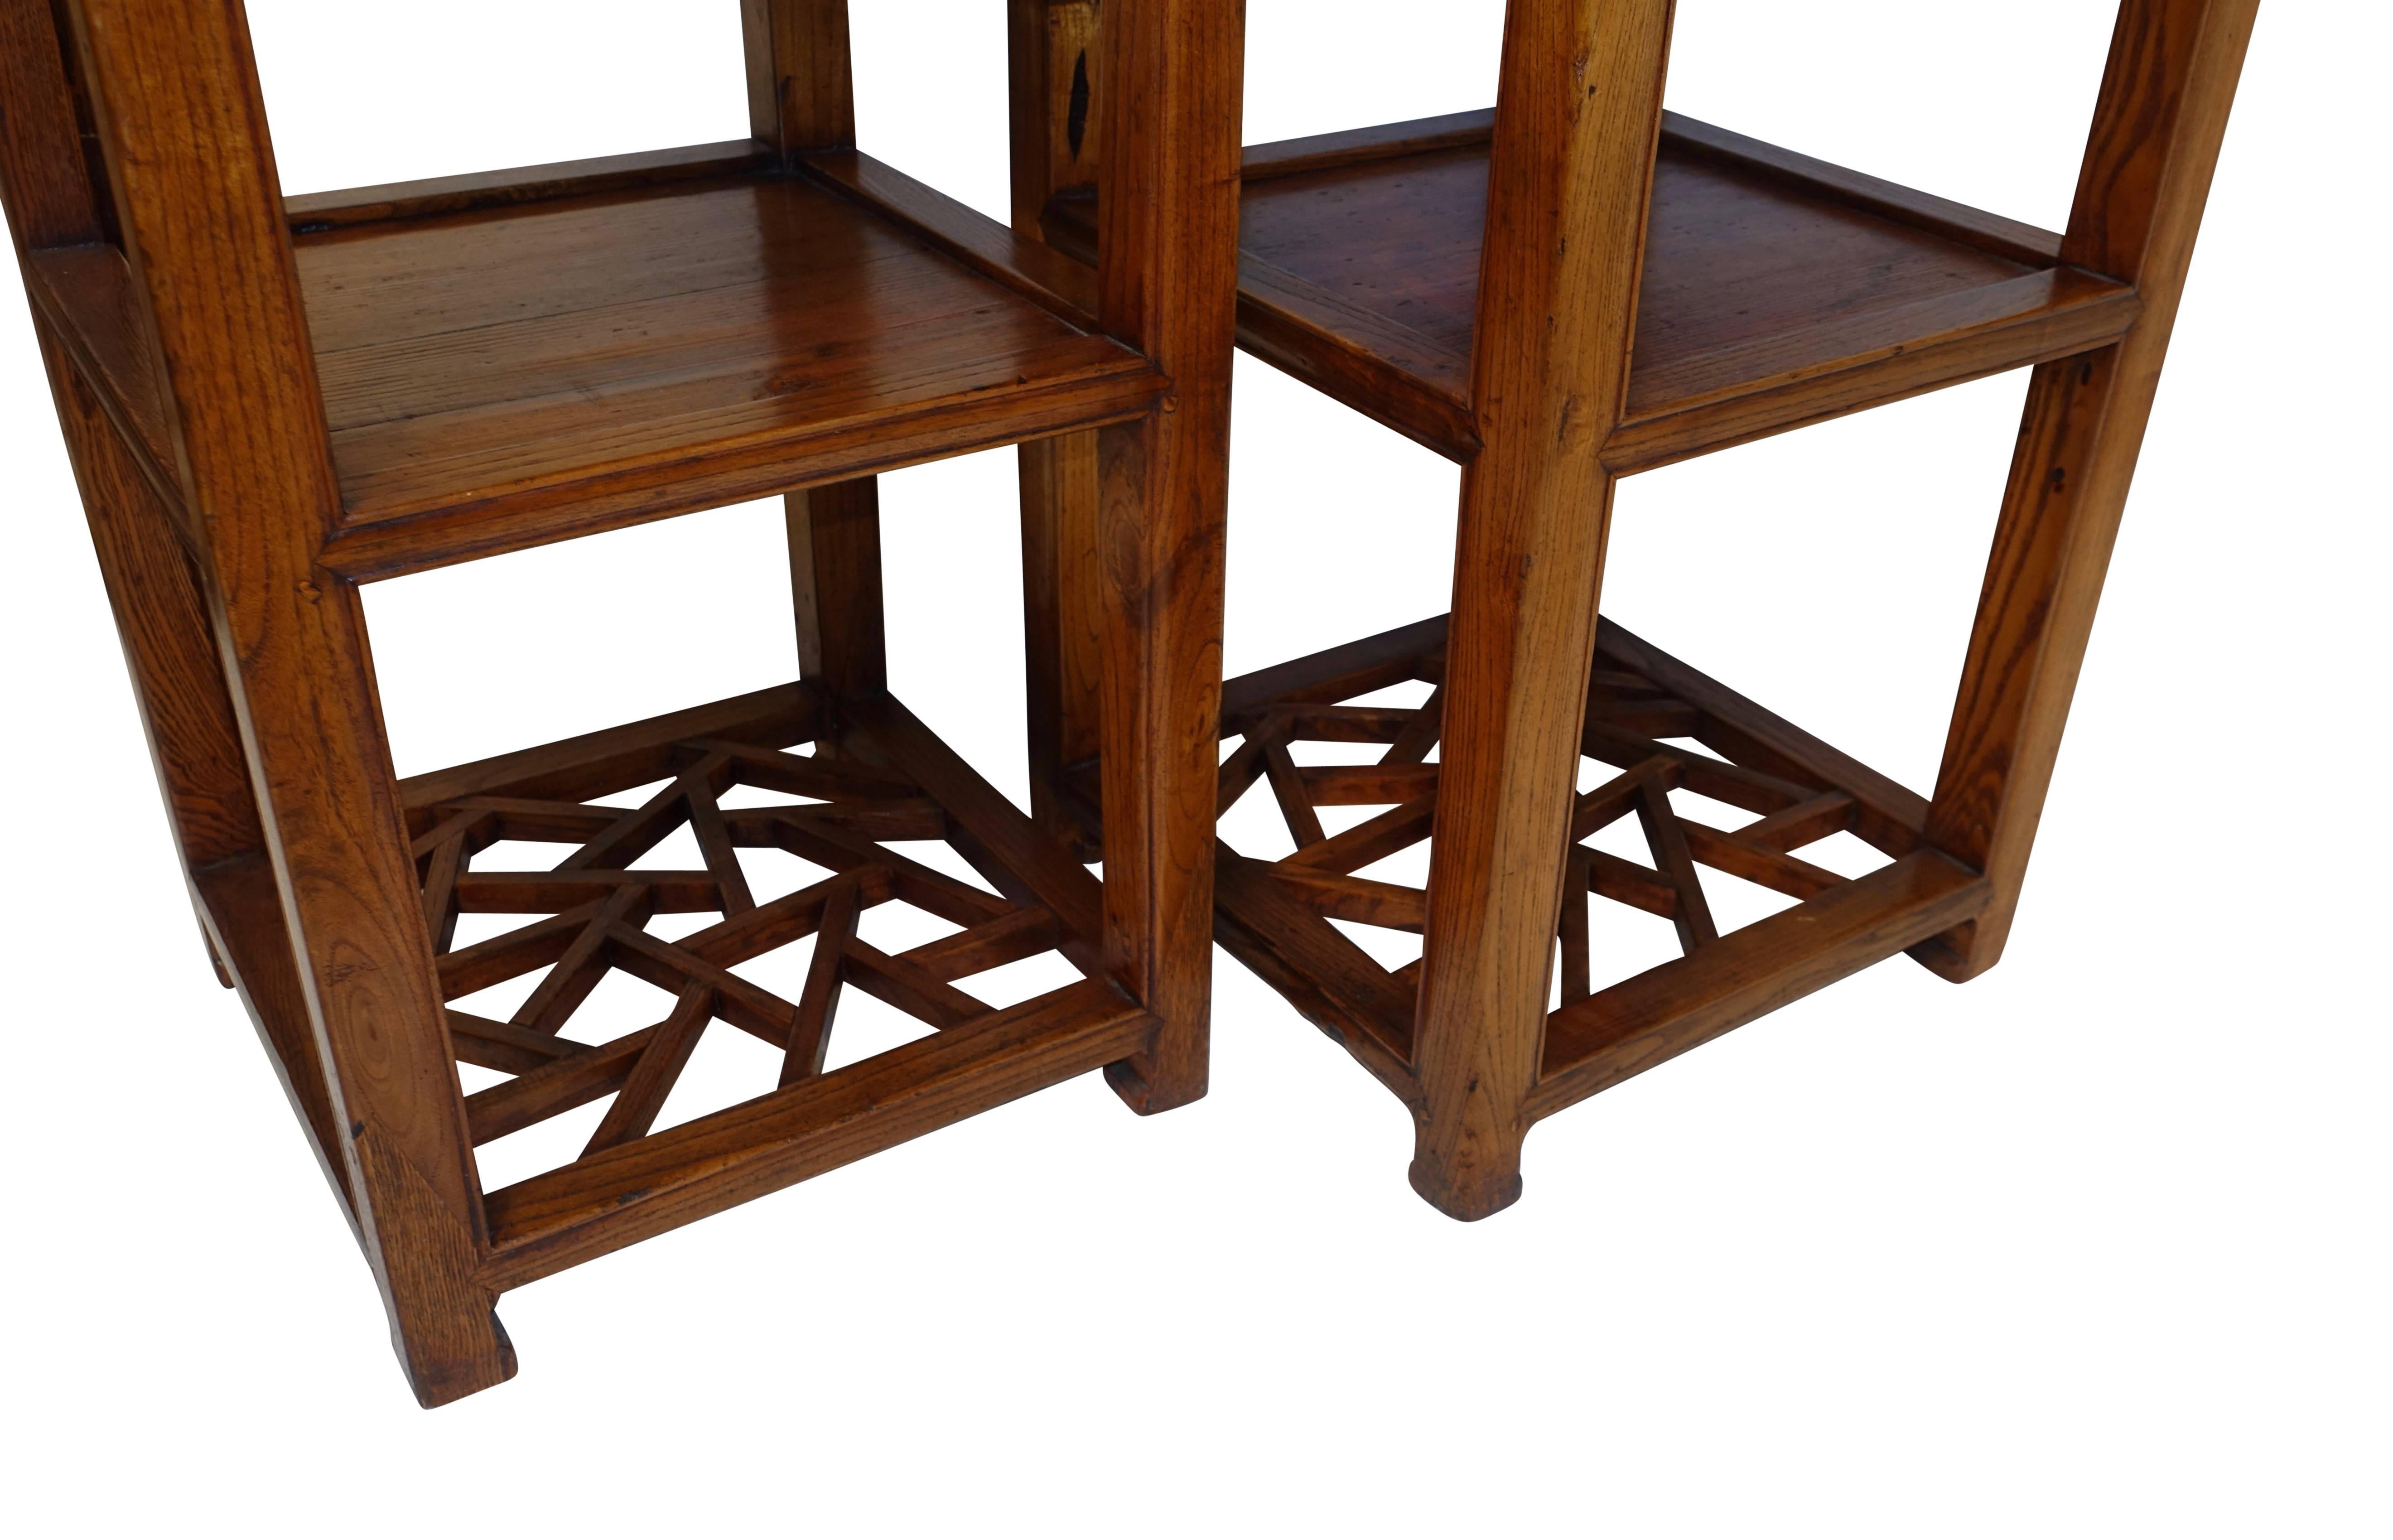 Pair of Qing Dynasty Two-Tier Stands with Hidden Drawers 1